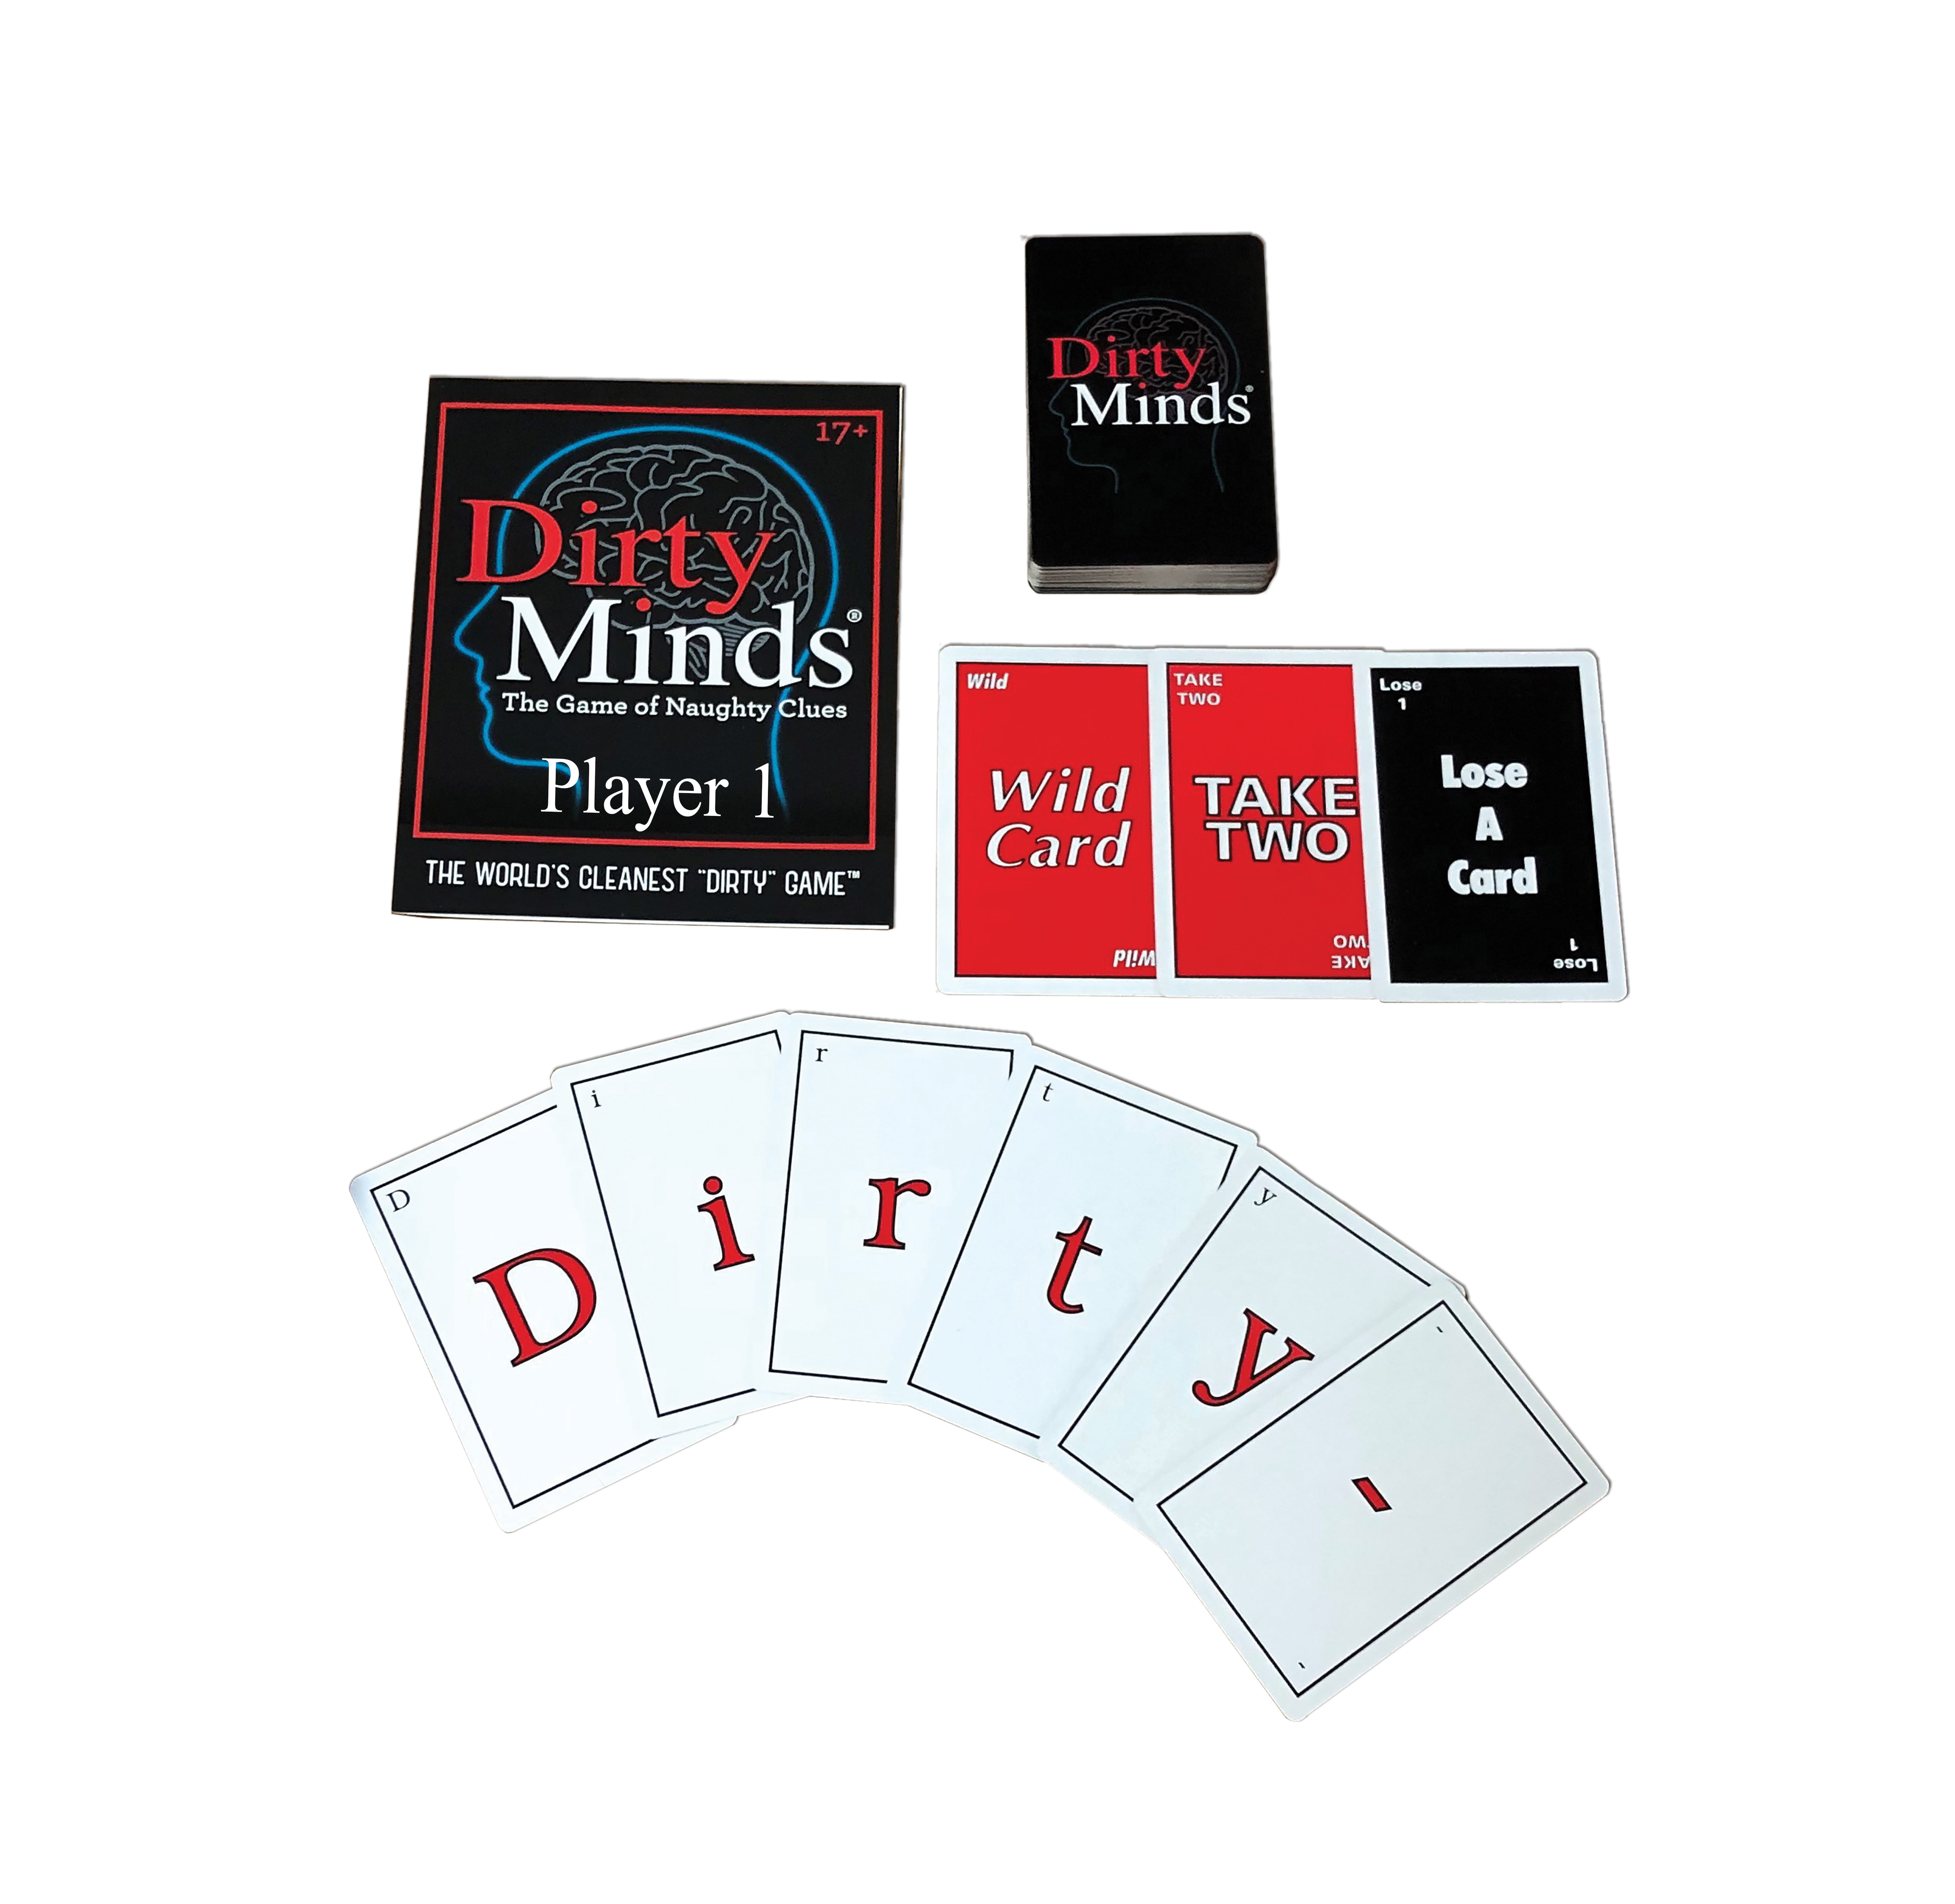 277 DIRTY MINDS Adult Only Party Drinking After Dinner Fun Board Game Complete 